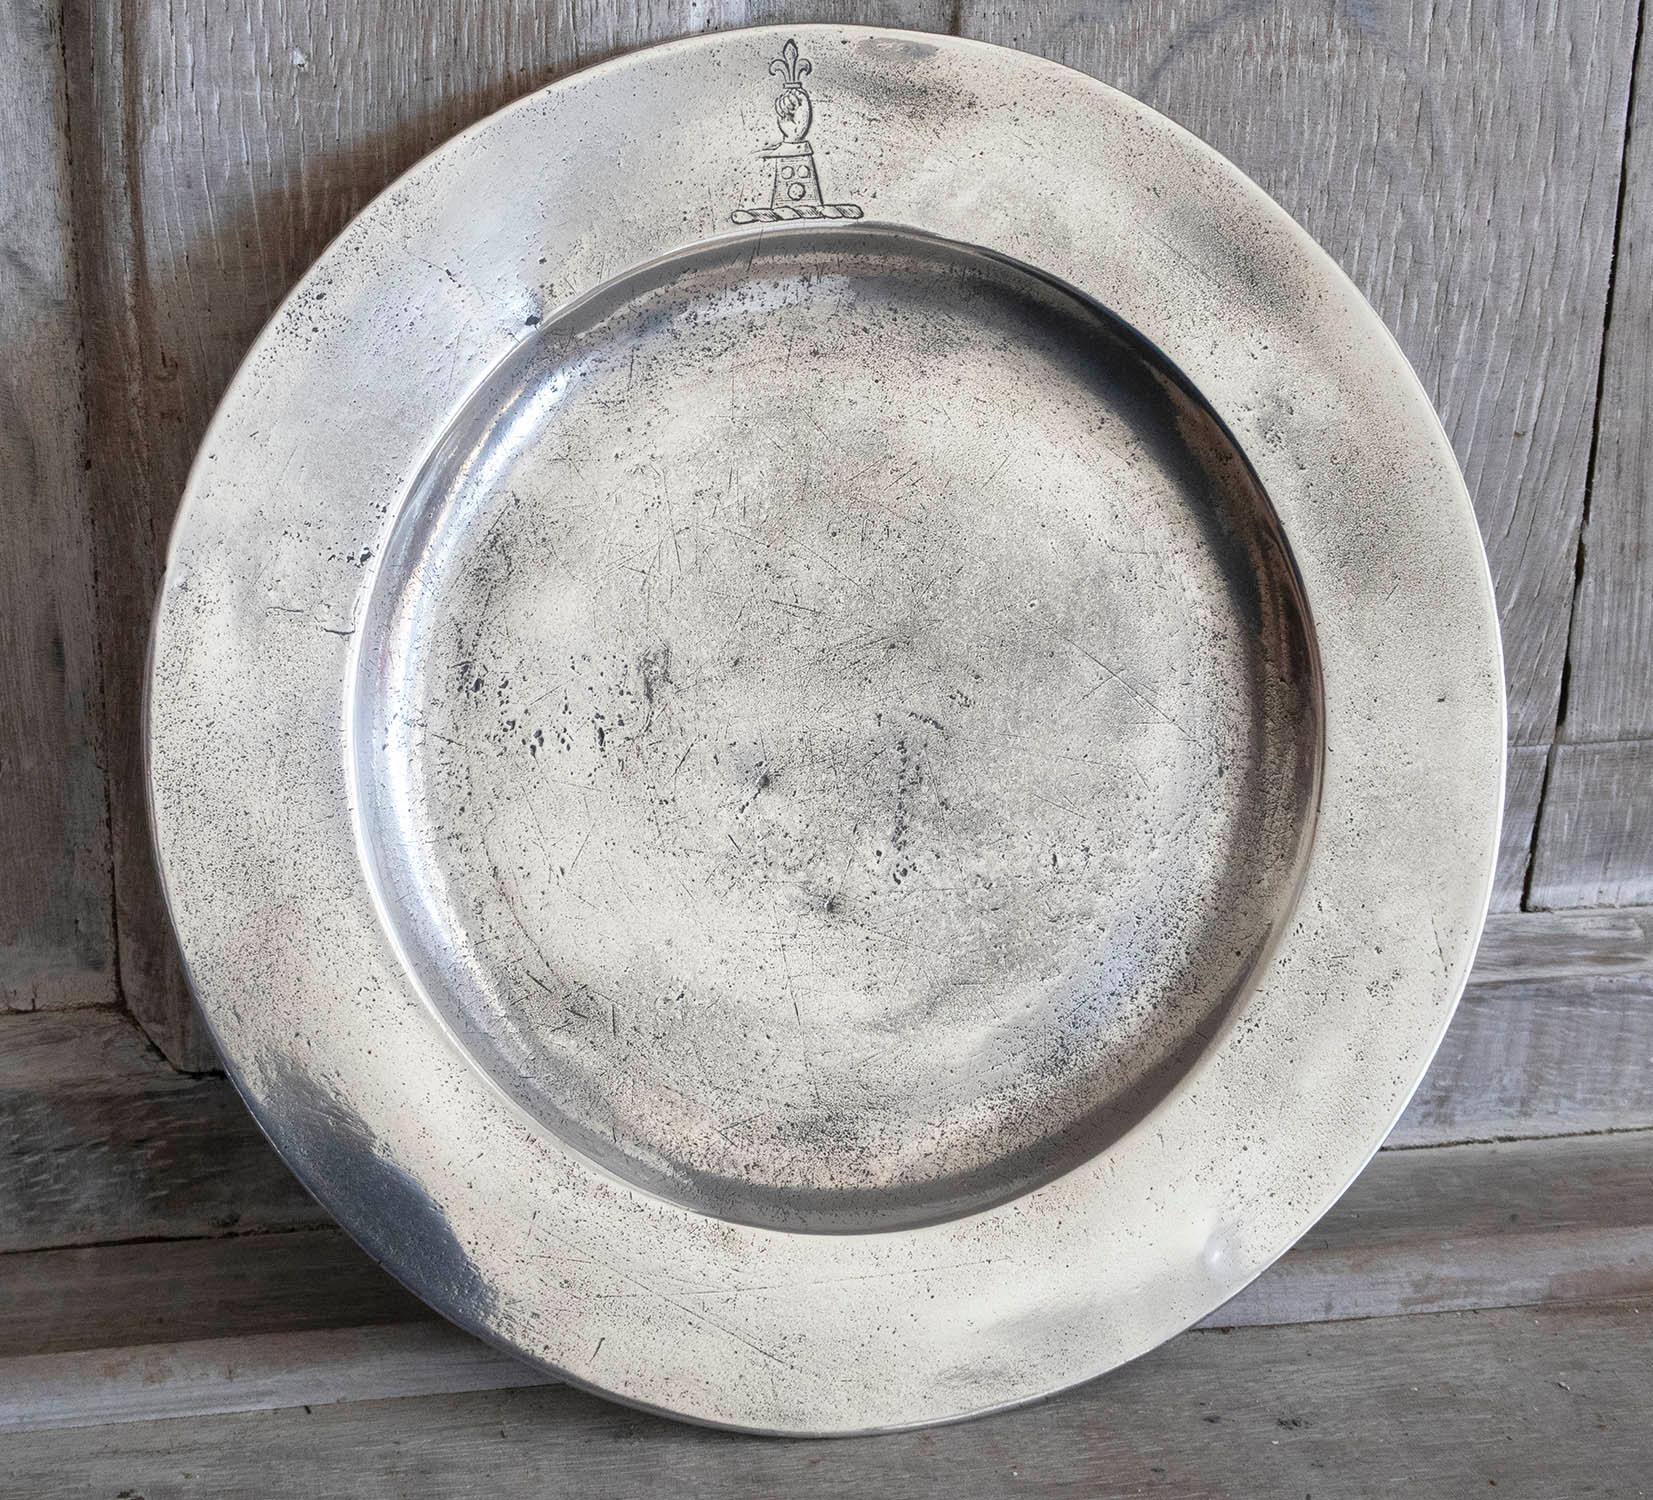 Lovely highly polished pewter plate.

With hand and fleur de lys armorial

Evidence of a rubbed touchmark on the underside. London maker

The pewter has been polished to its original shine to imitate polished silver. It was known as the Poor Man's